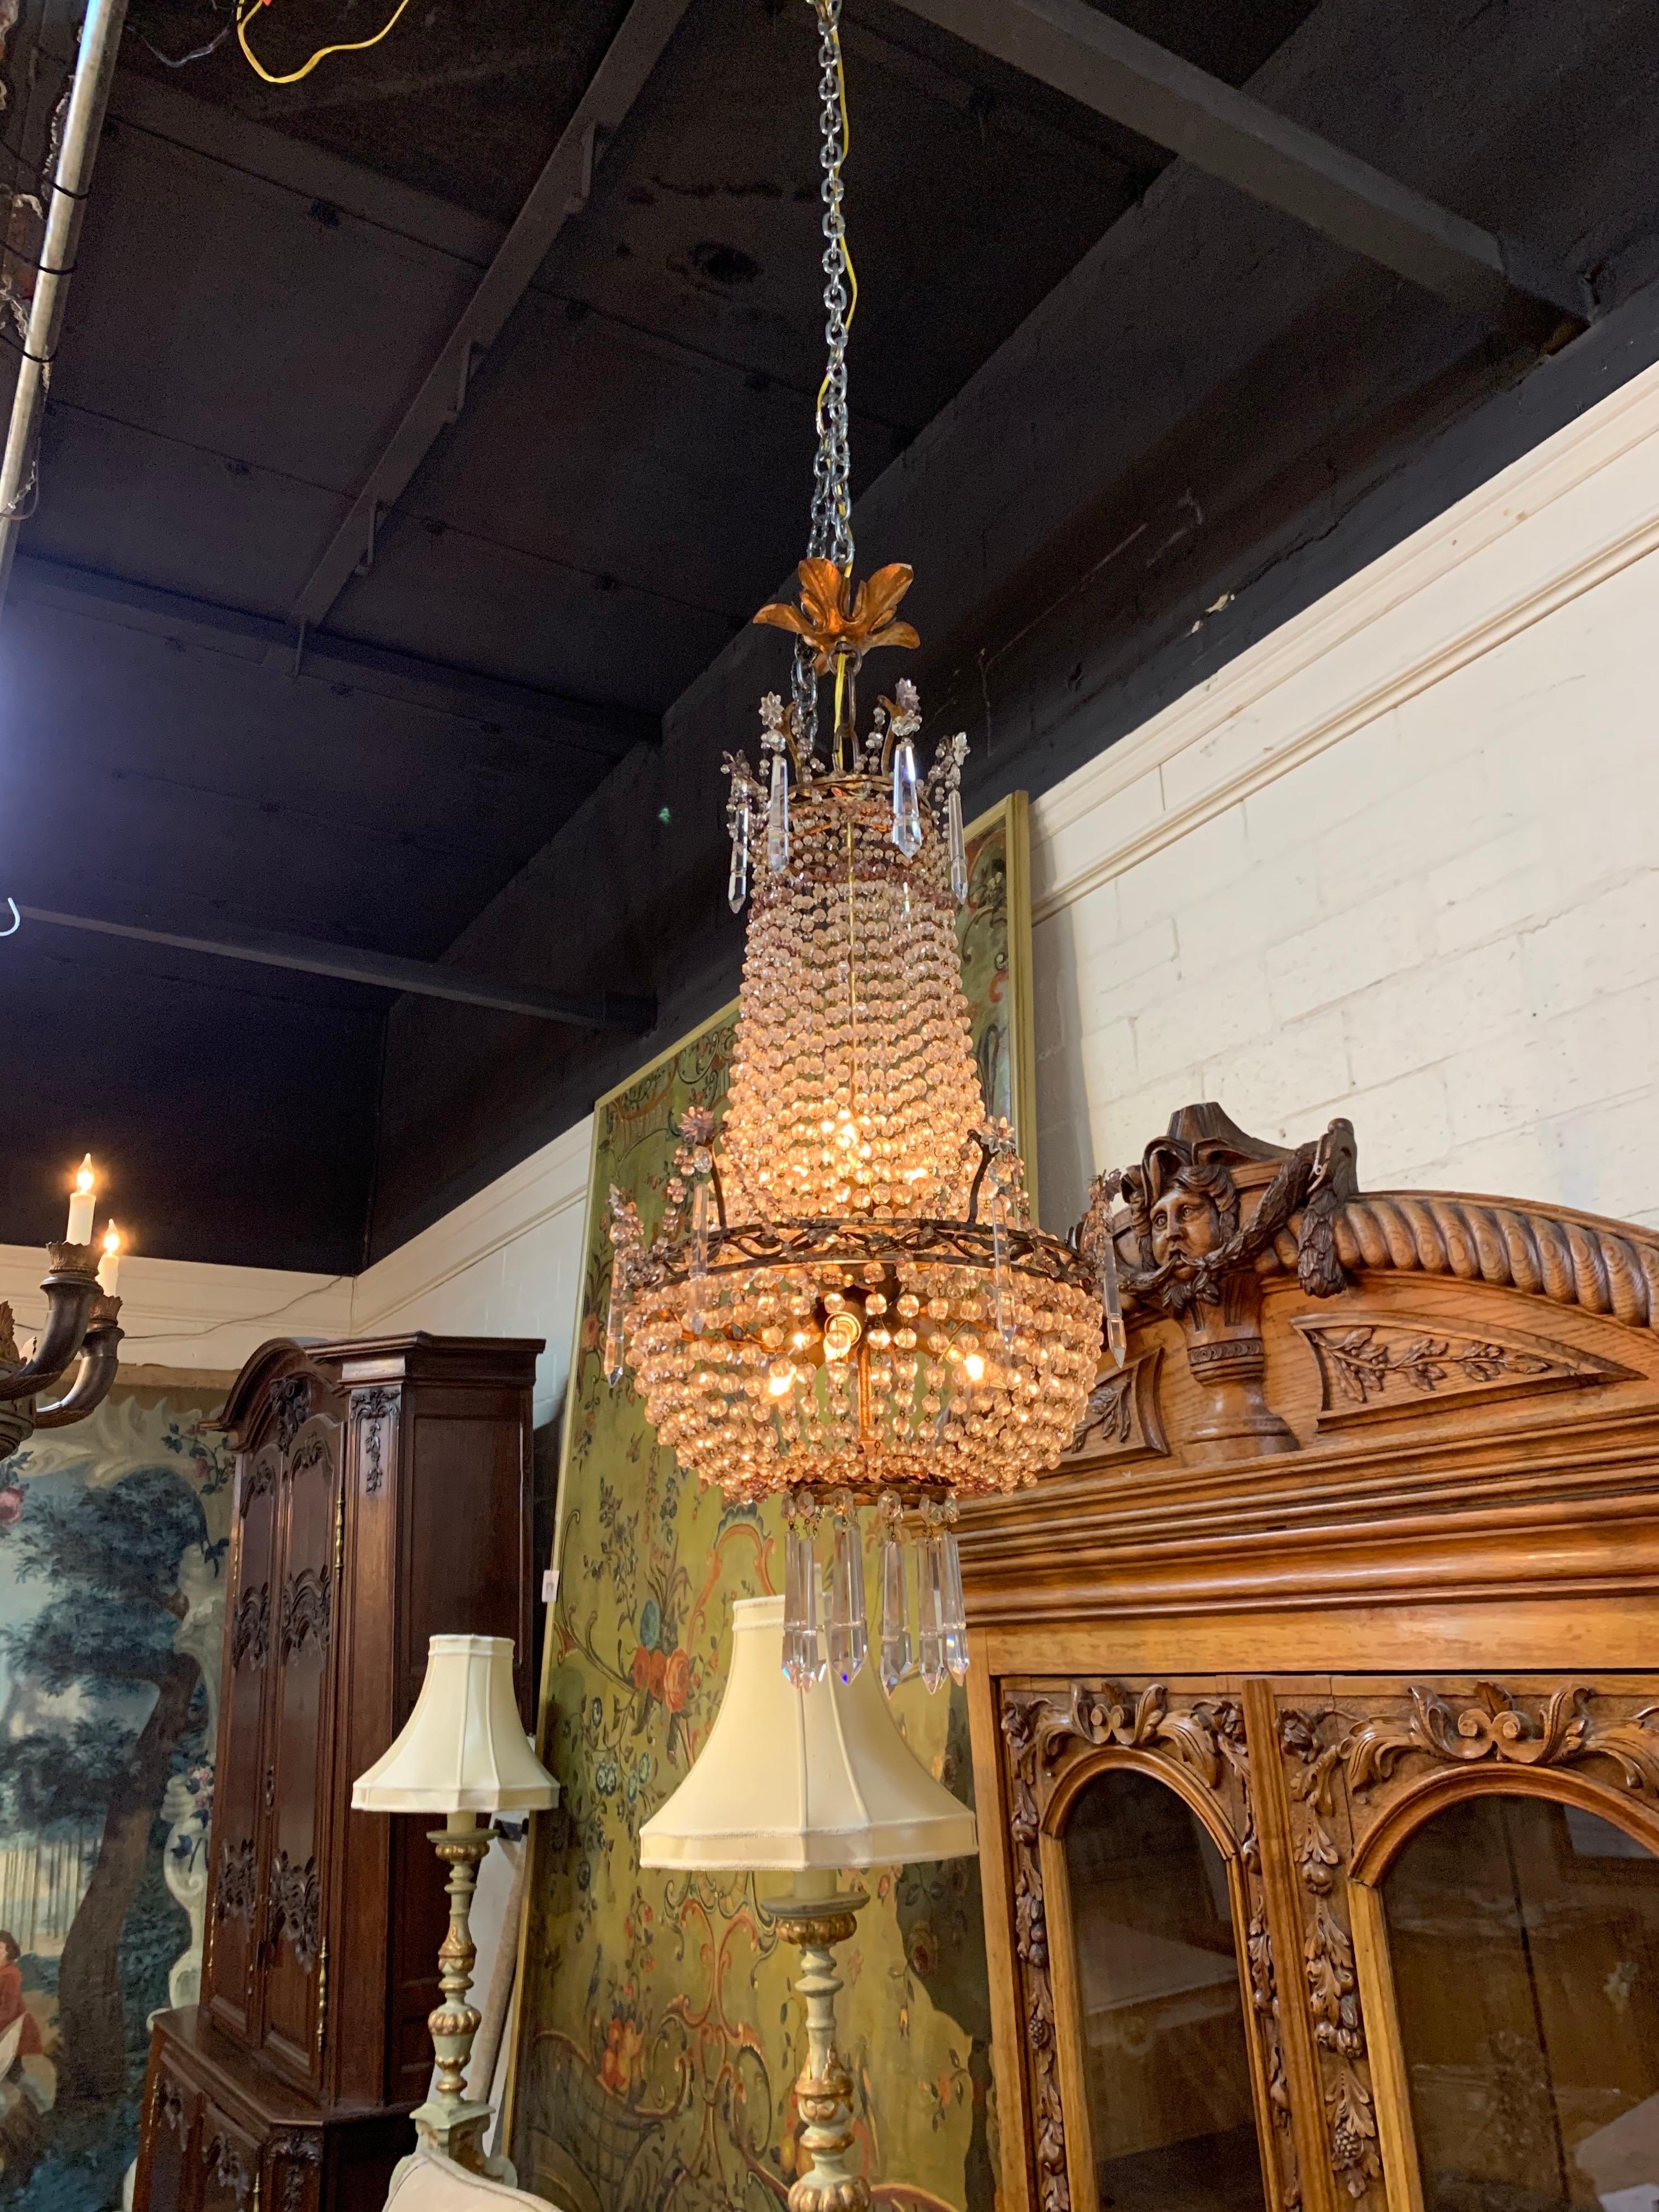 Elegant 19th century French beaded crystal and amethyst chandelier. Beautiful crystals mixed with touches of amethyst. Creates an impressive image!